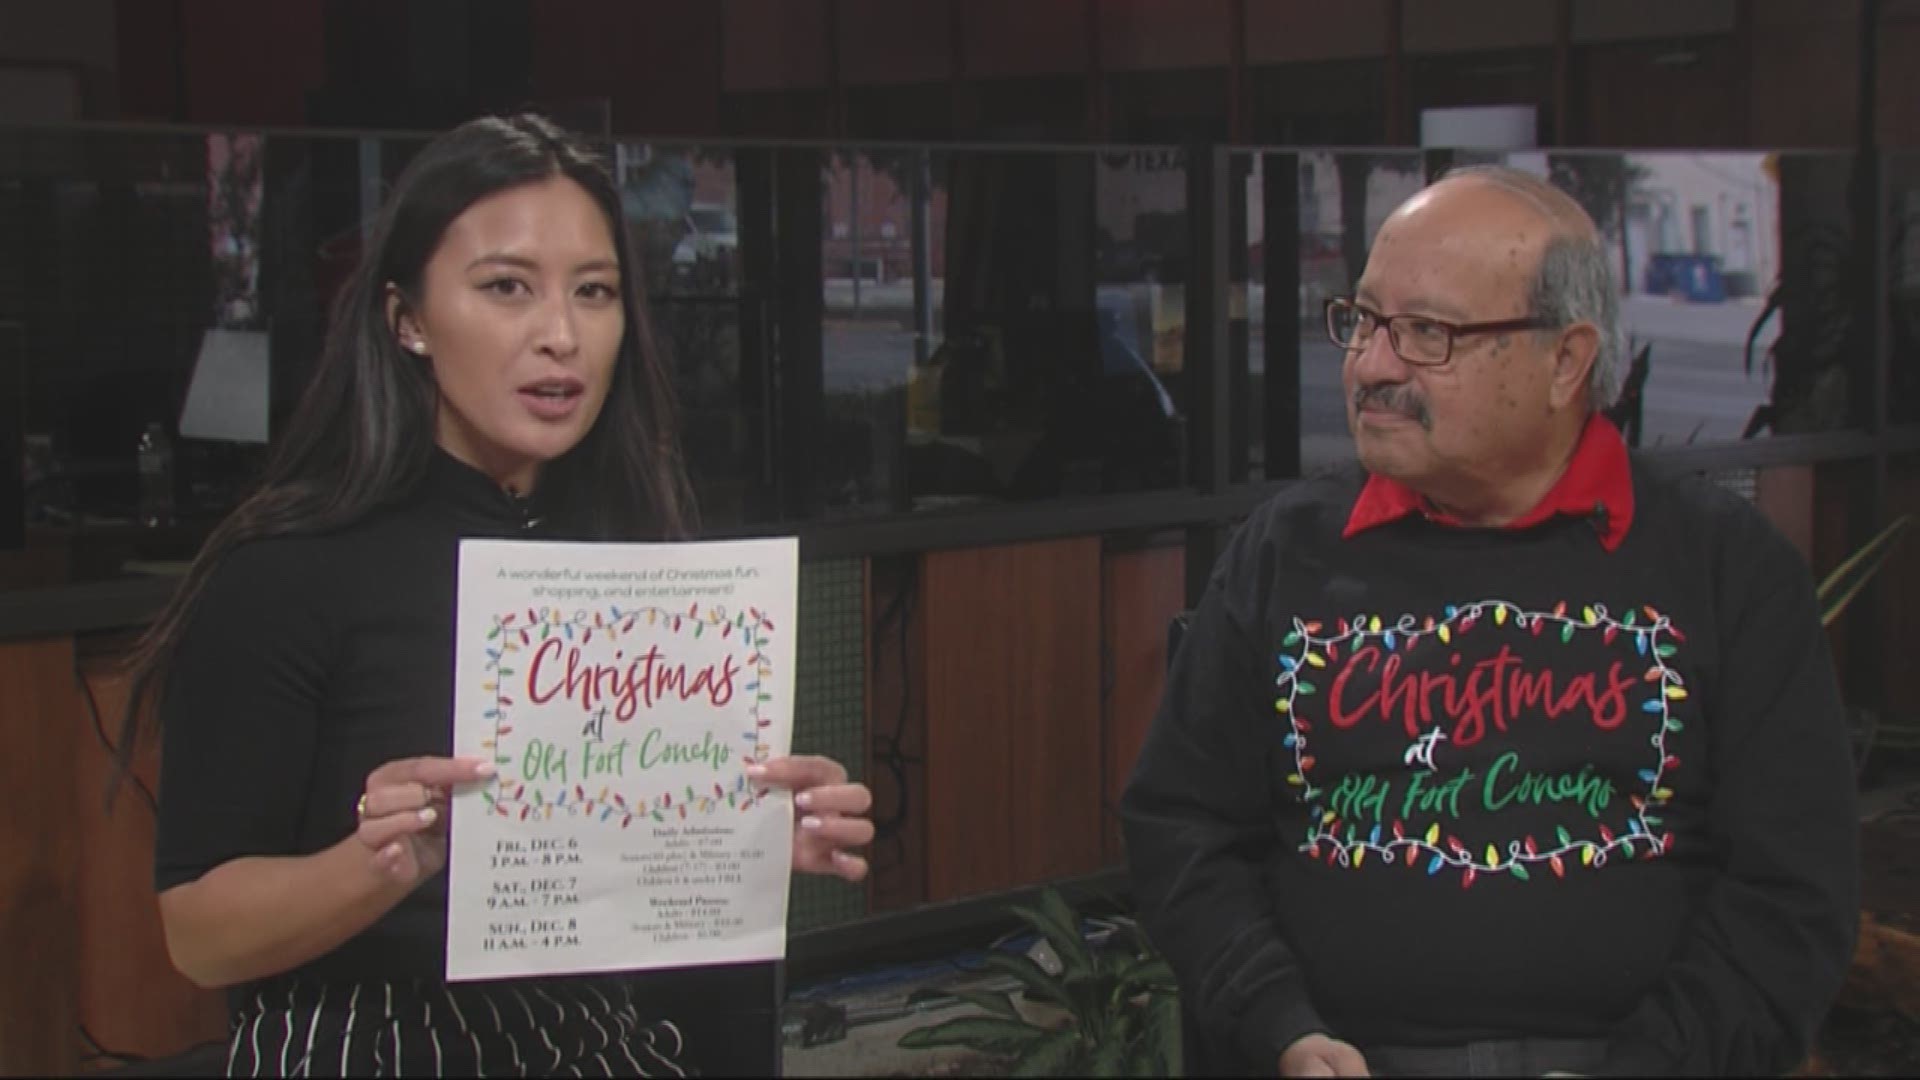 Our Camille Requiestas spoke to Rudy Barrons about the new features coming to the Christmas at the Old Fort Concho.